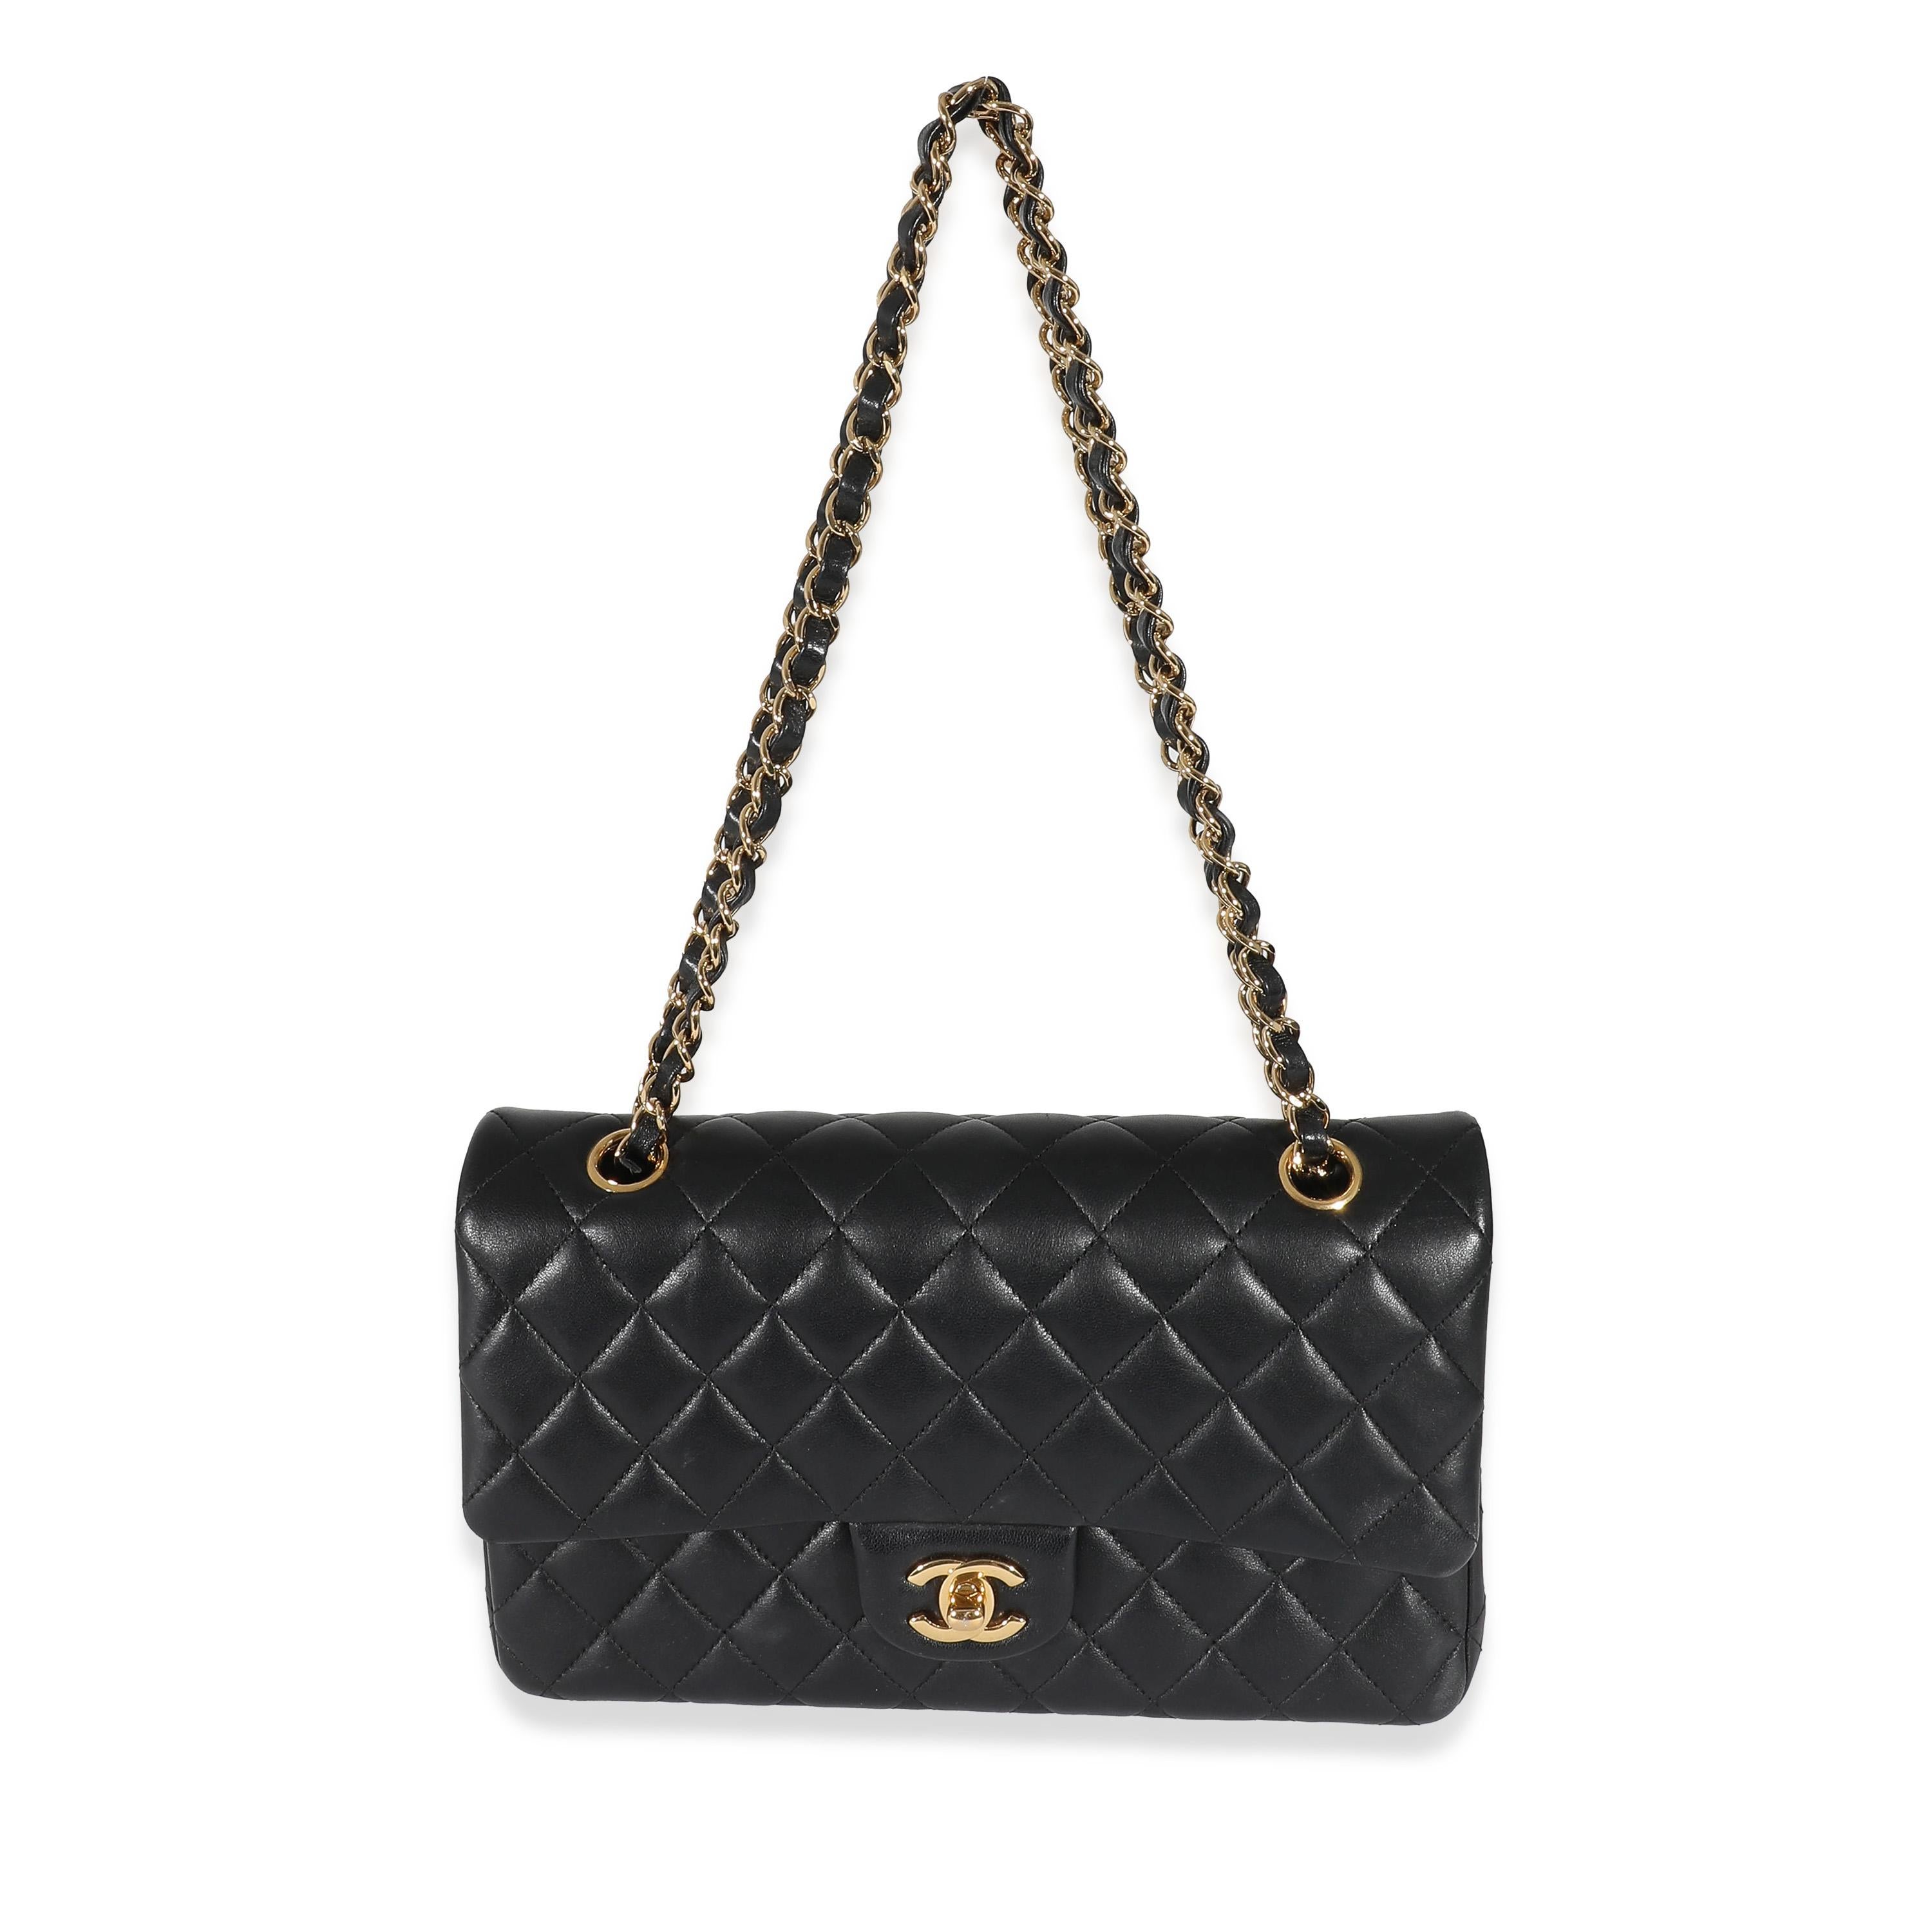 Listing Title: Chanel Black Lambskin Medium Classic Double Flap Bag
SKU: 132539
Condition: Pre-owned 
Handbag Condition: Very Good
Condition Comments: Item is in very good condition with minor signs of wear.  Exterior corner scuffing and throughout.